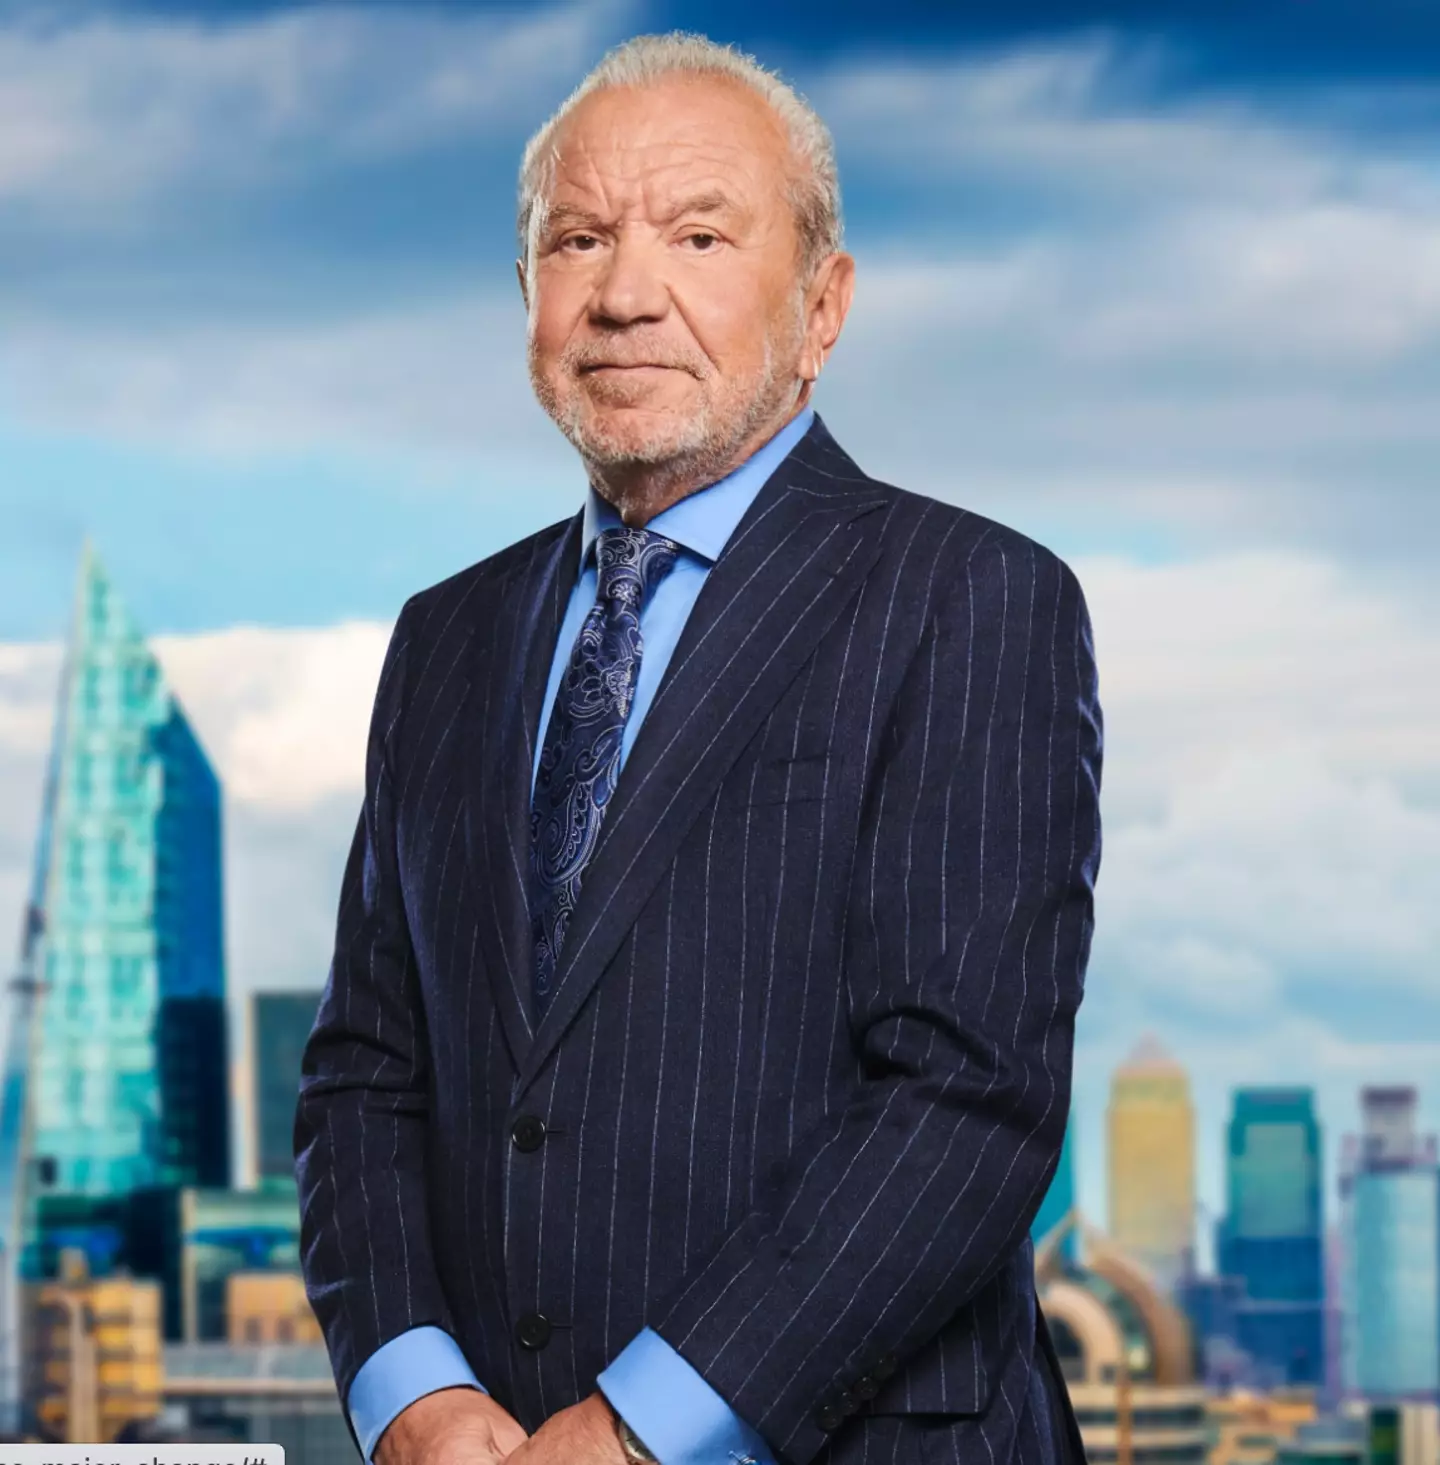 Lord Sugar and his cronies will be returning once again.